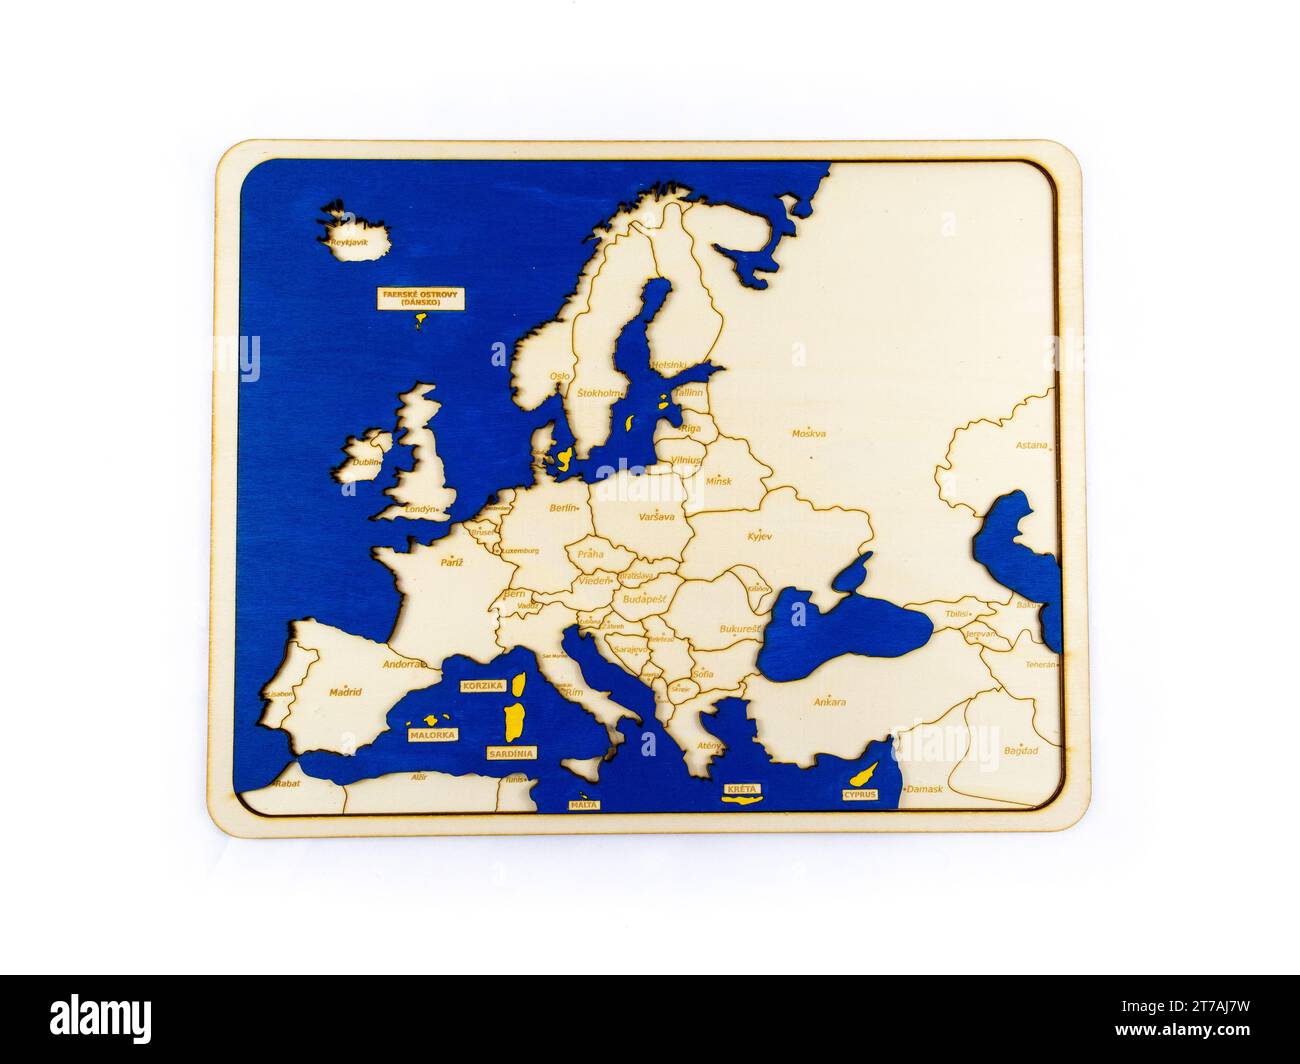 close-up photo of a wooden map of Europe with blue and yellow highlights. The map is made of wood and has been laser-cut to create a 3D relief effect. Stock Photo